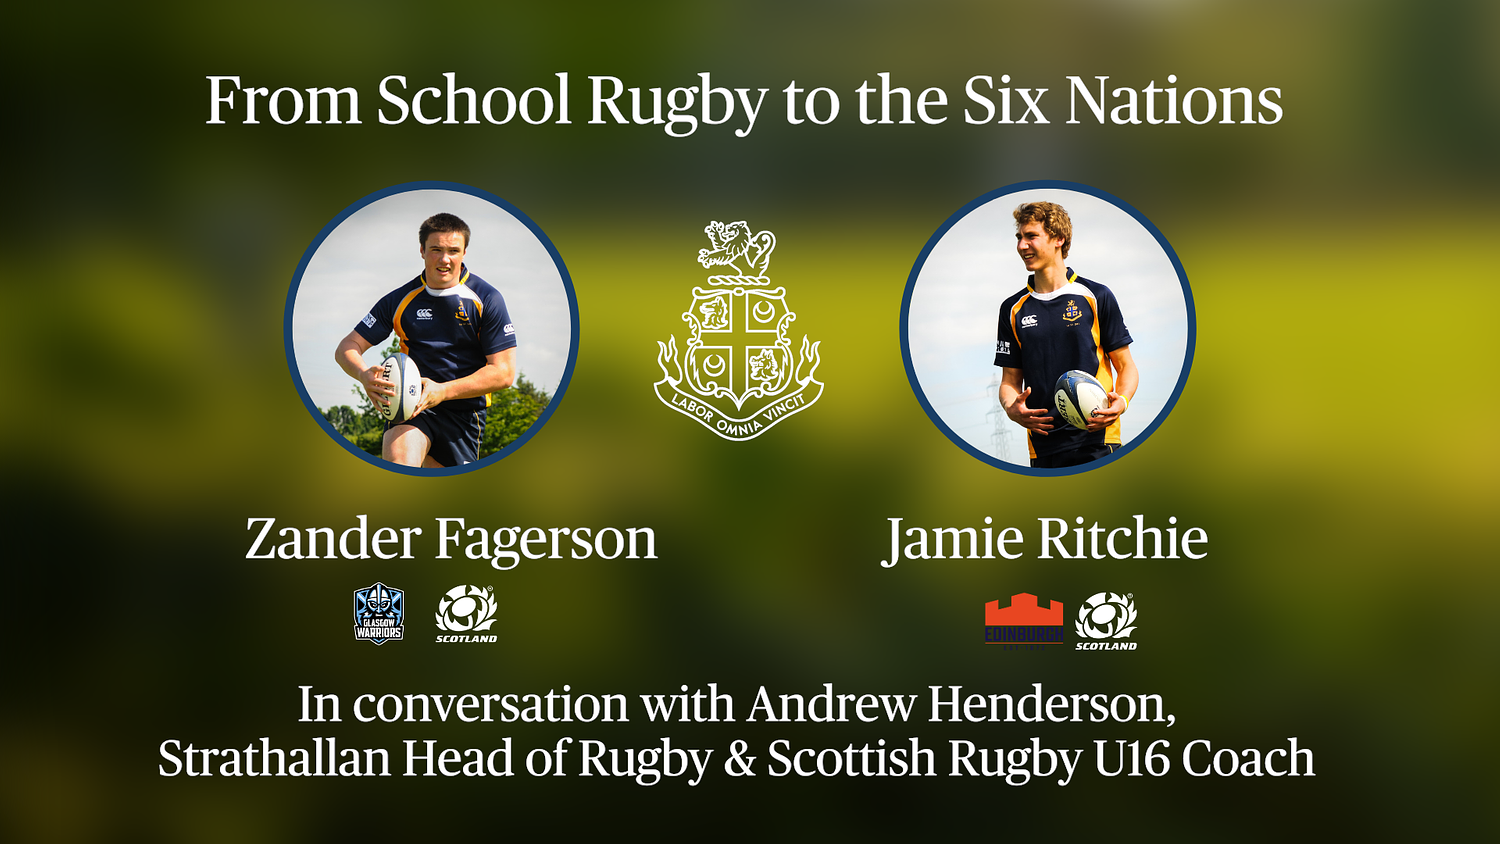 From school rugby to the Six Nations: Zander Fagerson and Jamie Ritchie in conversation